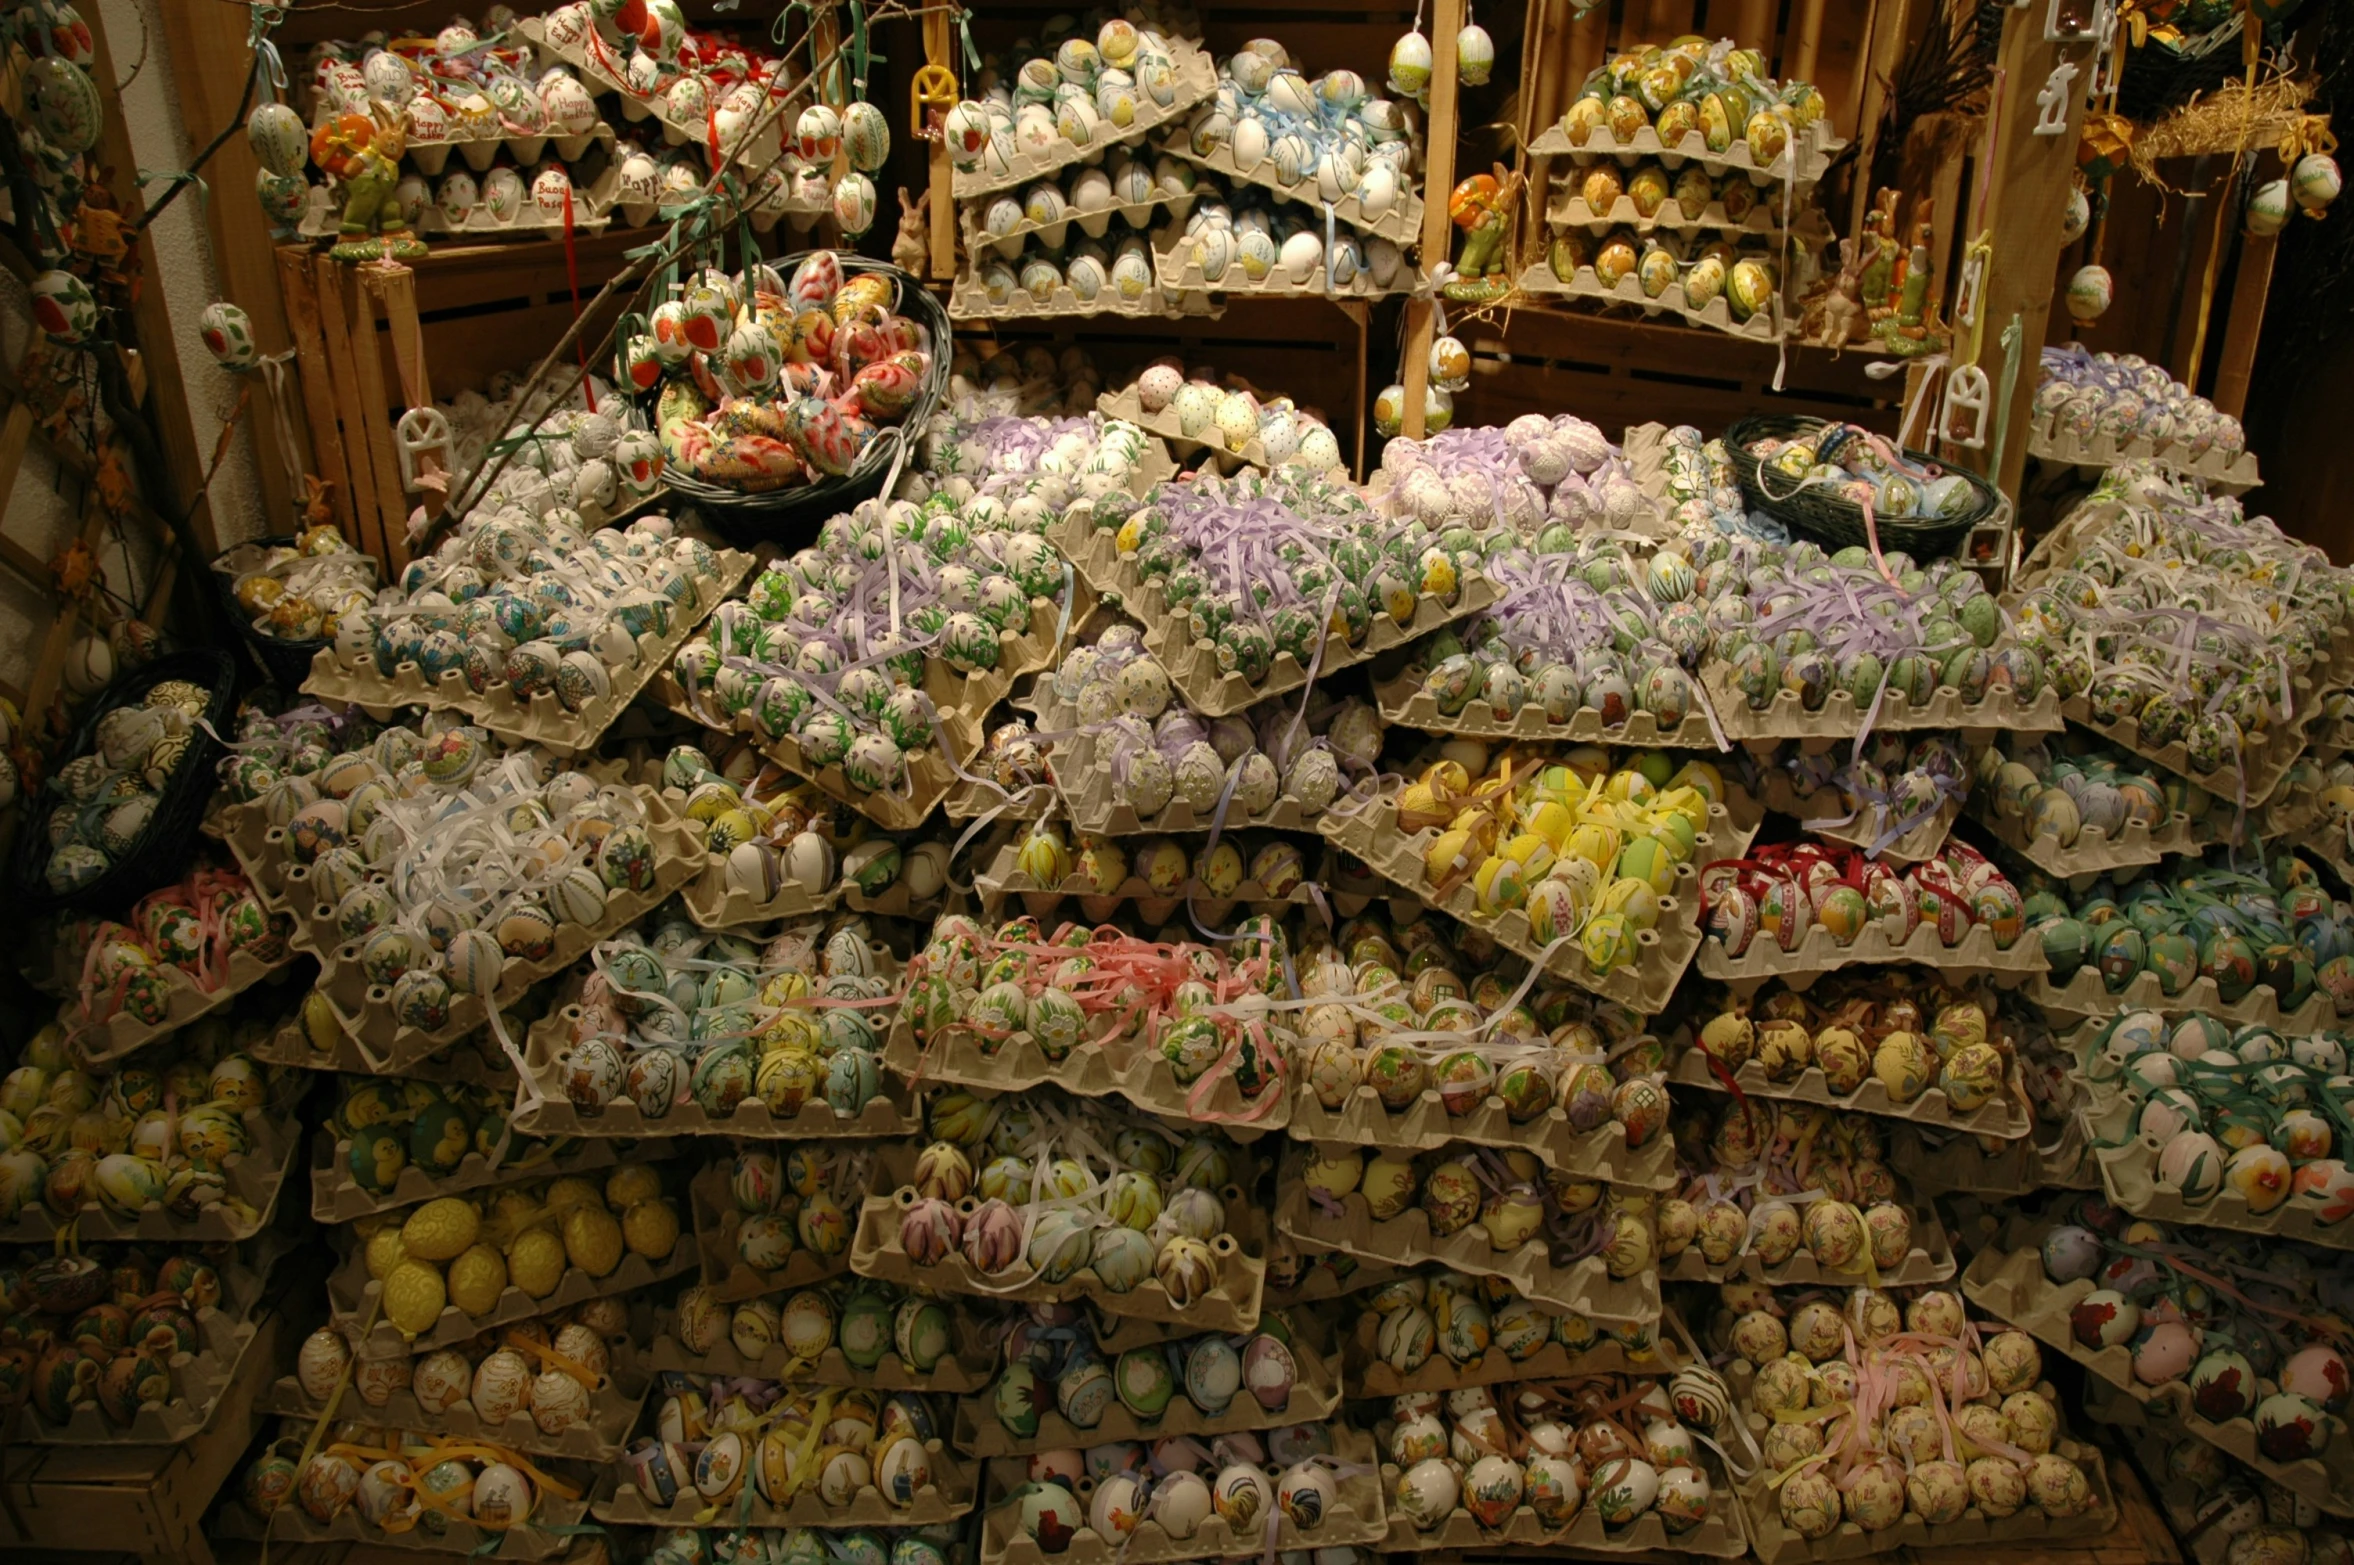 a bunch of colorful decorated eggs and other things for sale